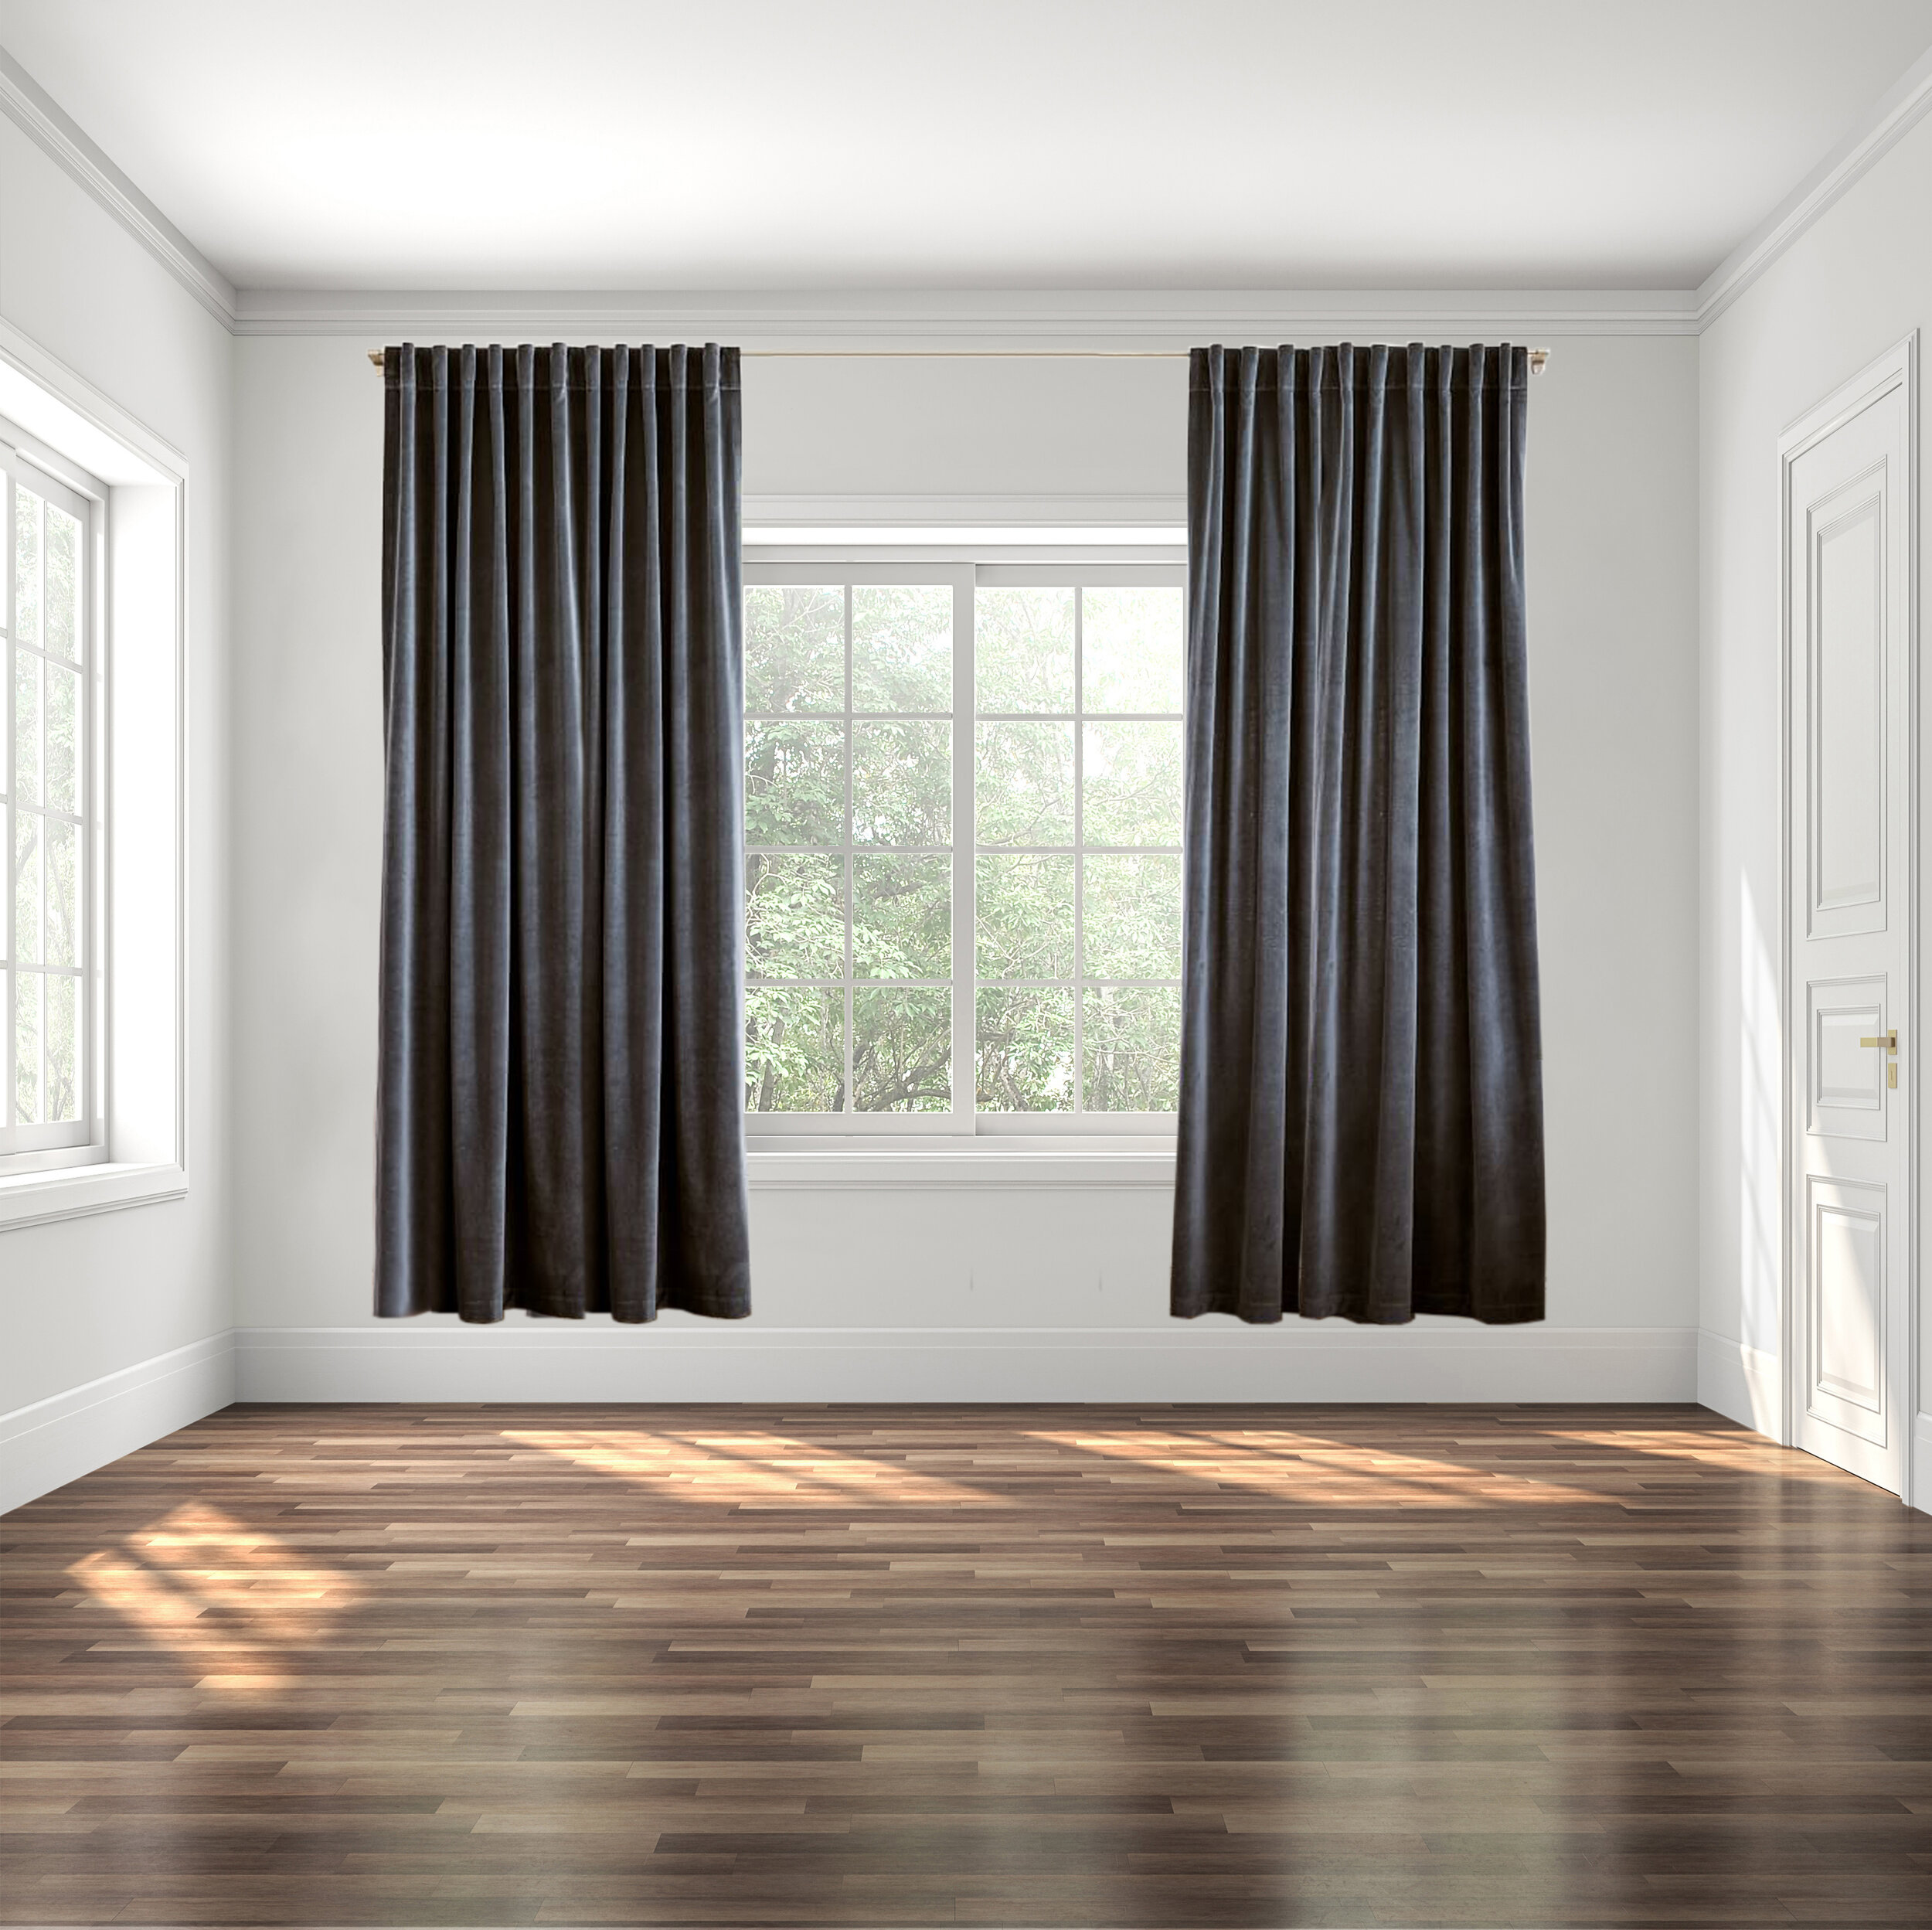 Curtain Placement Guide by Nadine Stay | Curtain placement do's and don'ts. How high to hang your curtain, how wide to place the rod, how long of curtains you should get, and how many curtain panels I recommend per window. | Nadine Stay